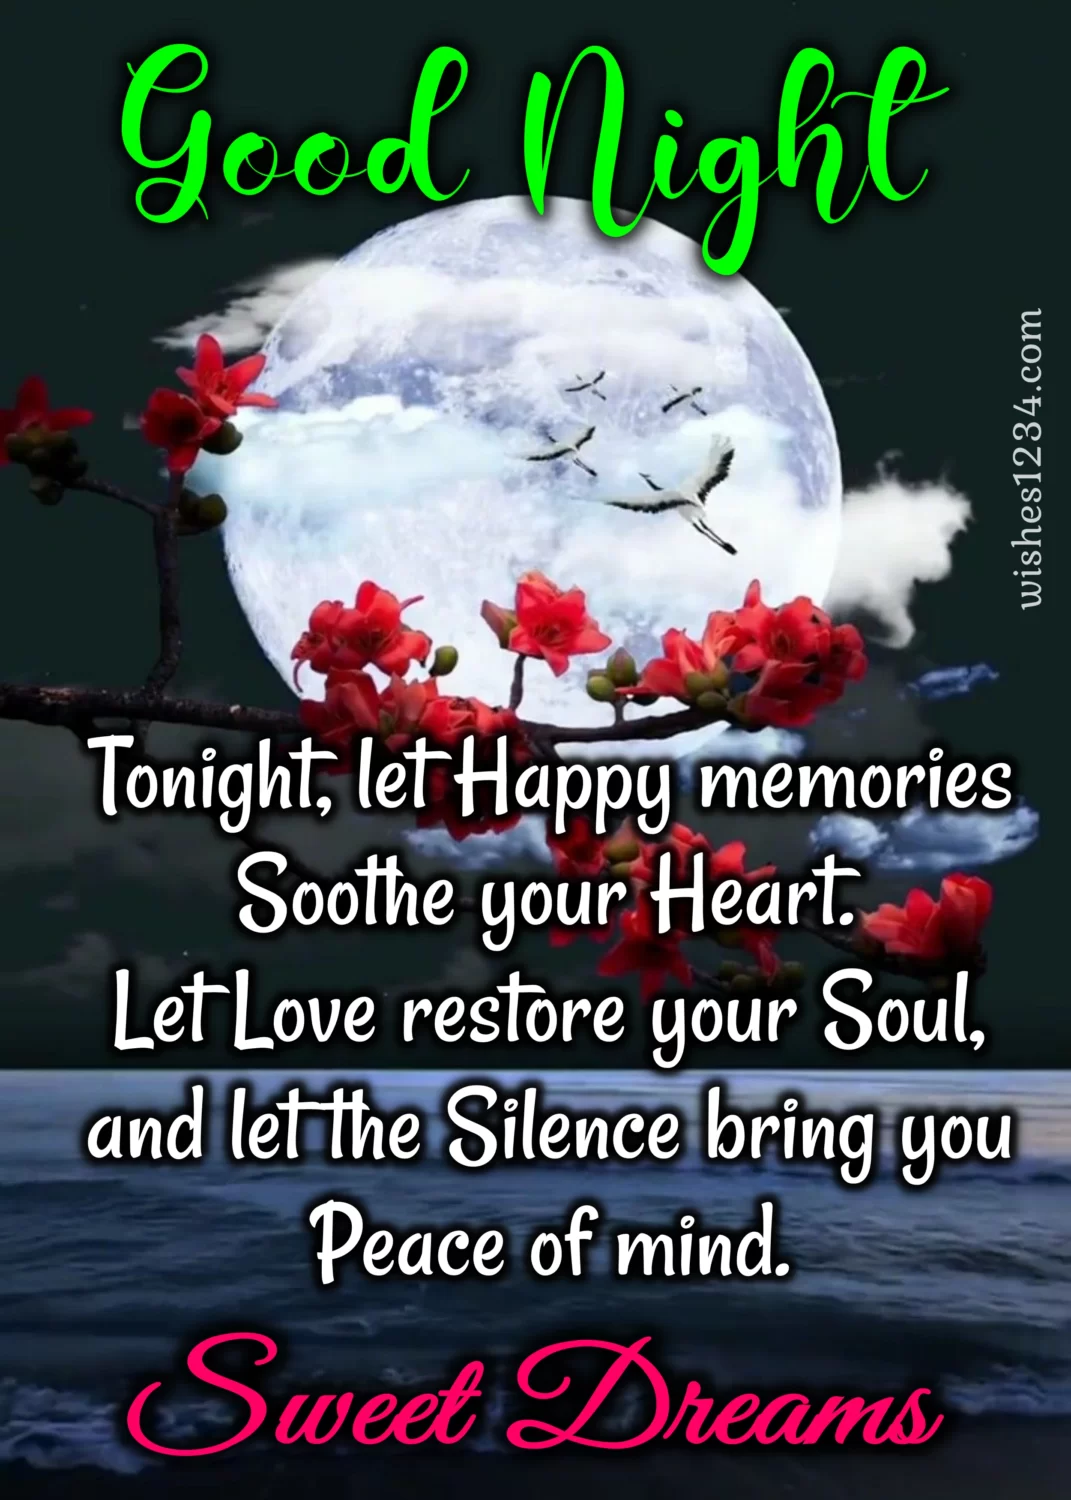 Good night wishes with bright moon in background, Good Night with Quotes.